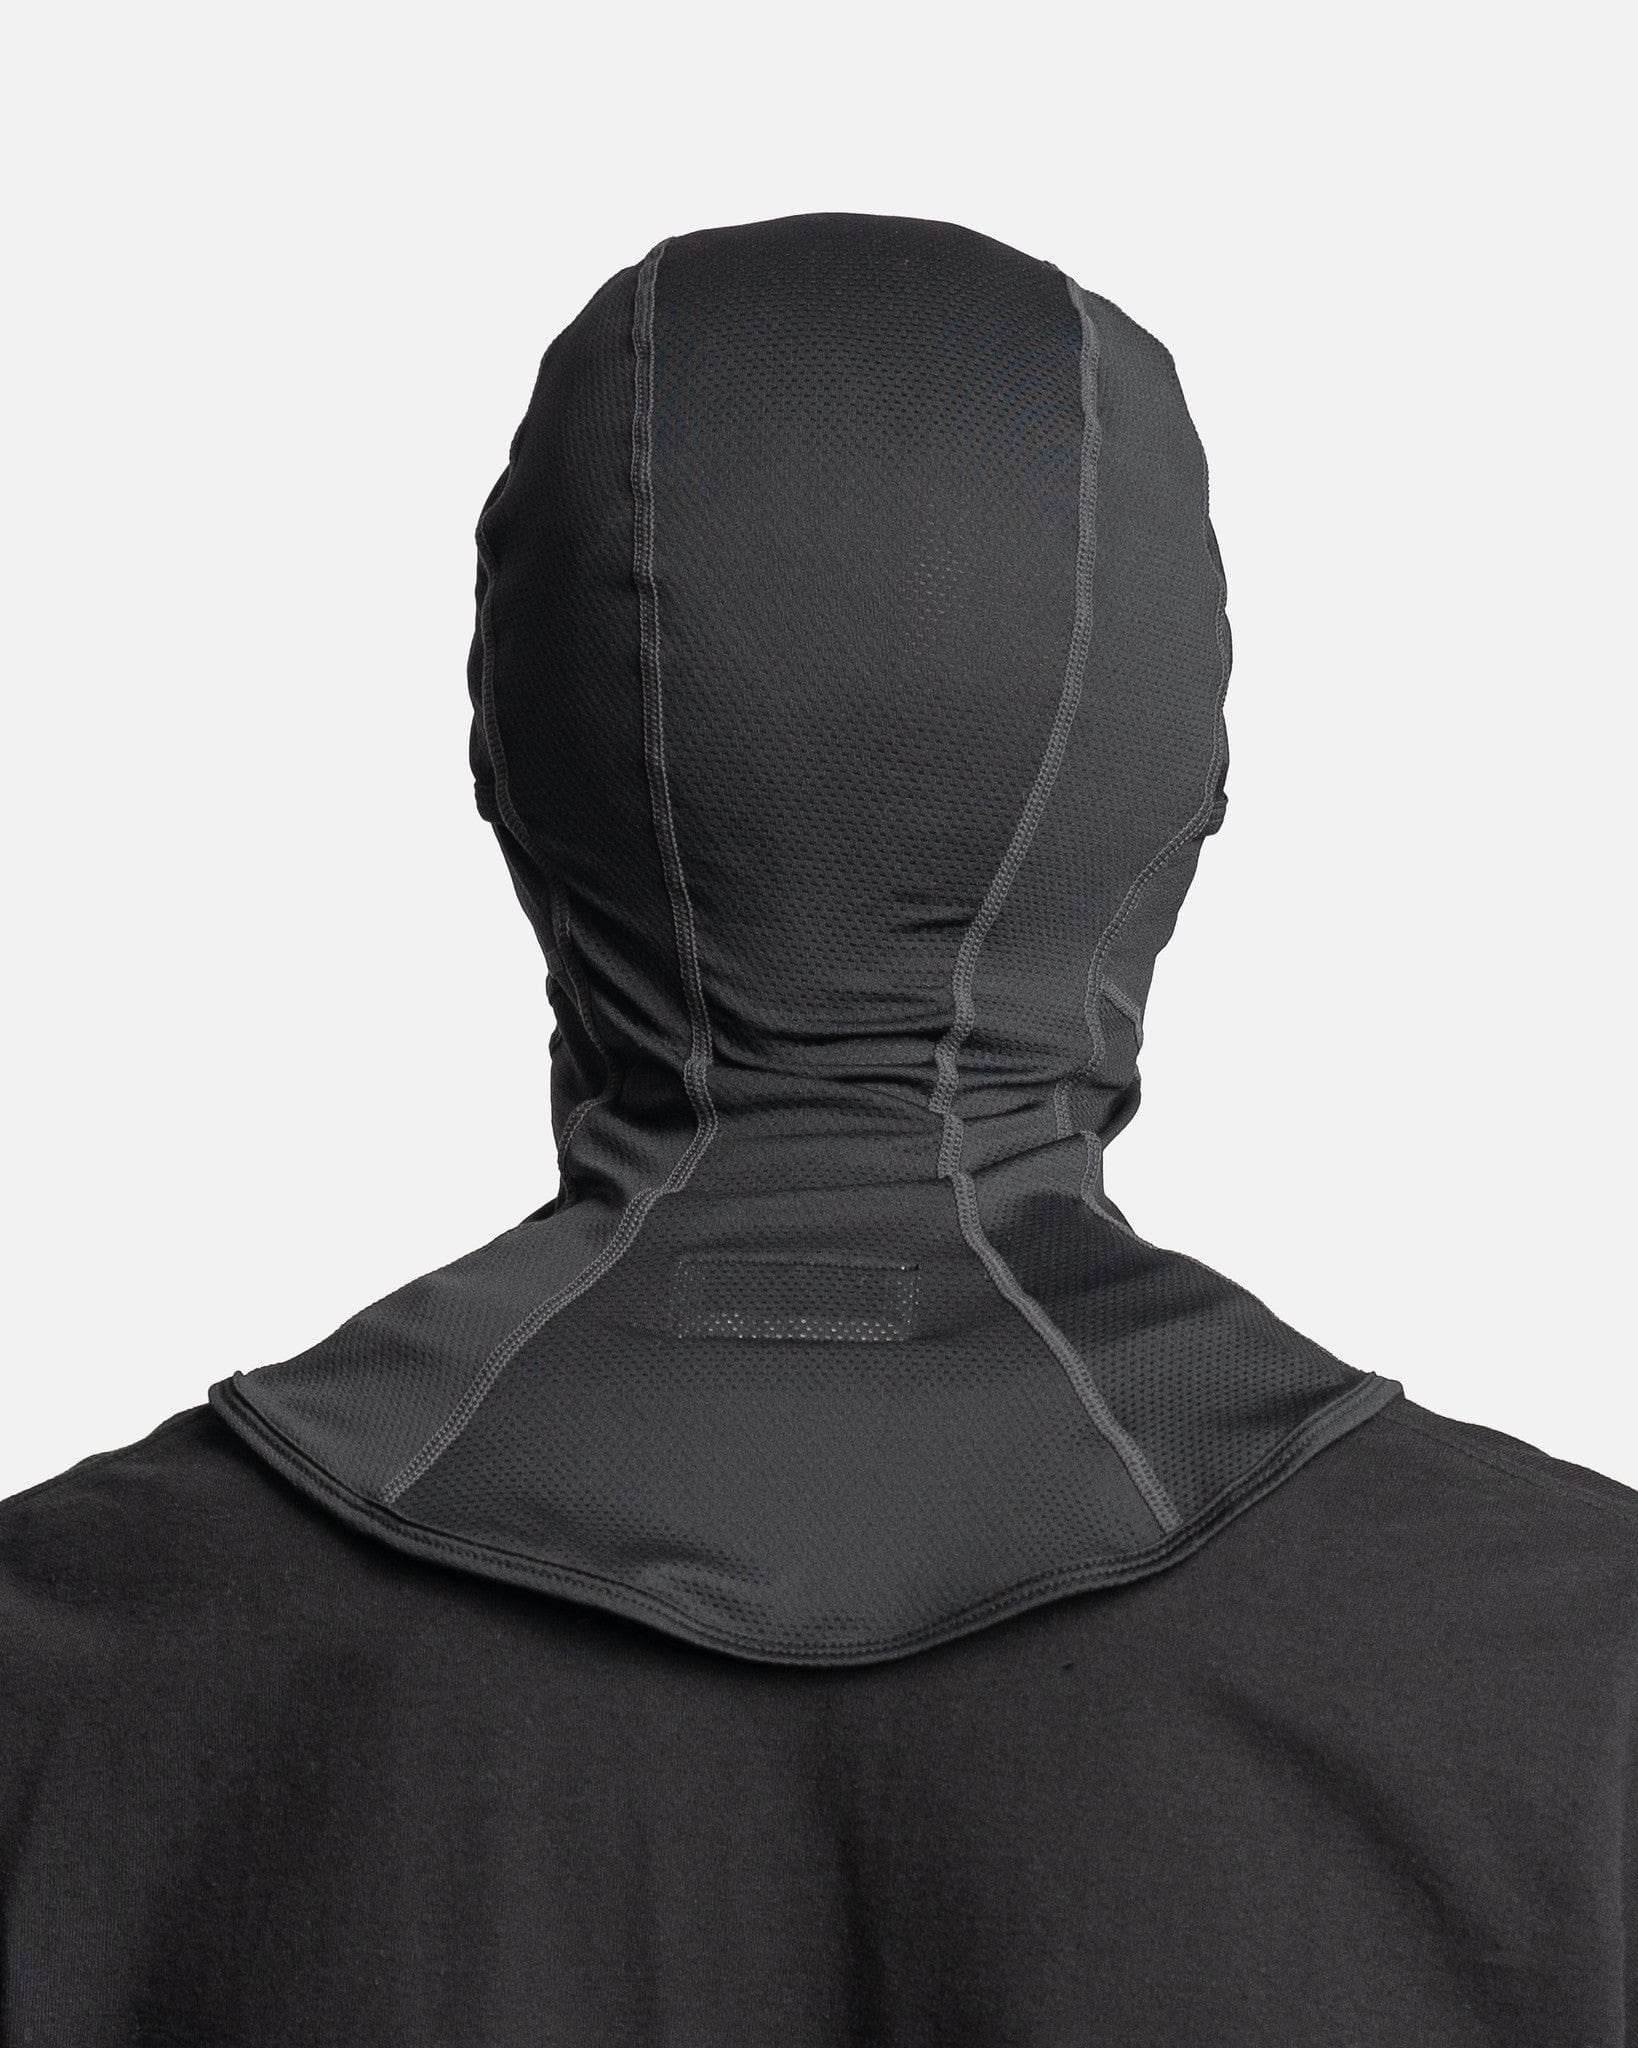 POST ARCHIVE FACTION (P.A.F) Men's Hats 5.0 Balaclava Right in Black